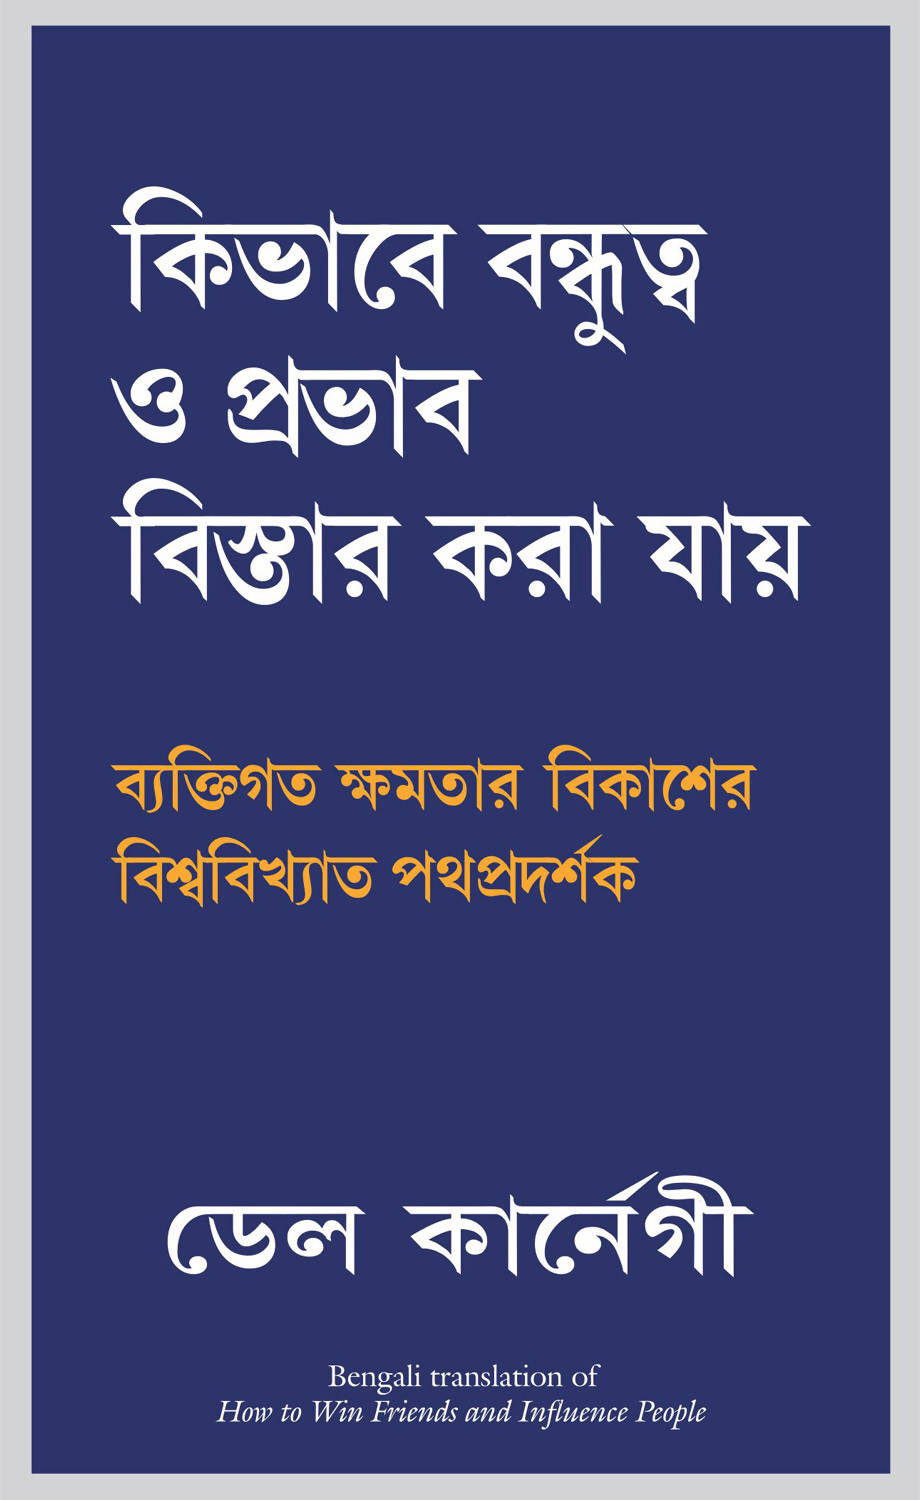 (Bengali)　available　Win　People　Online　Friends　Book　How　at　To　Influence